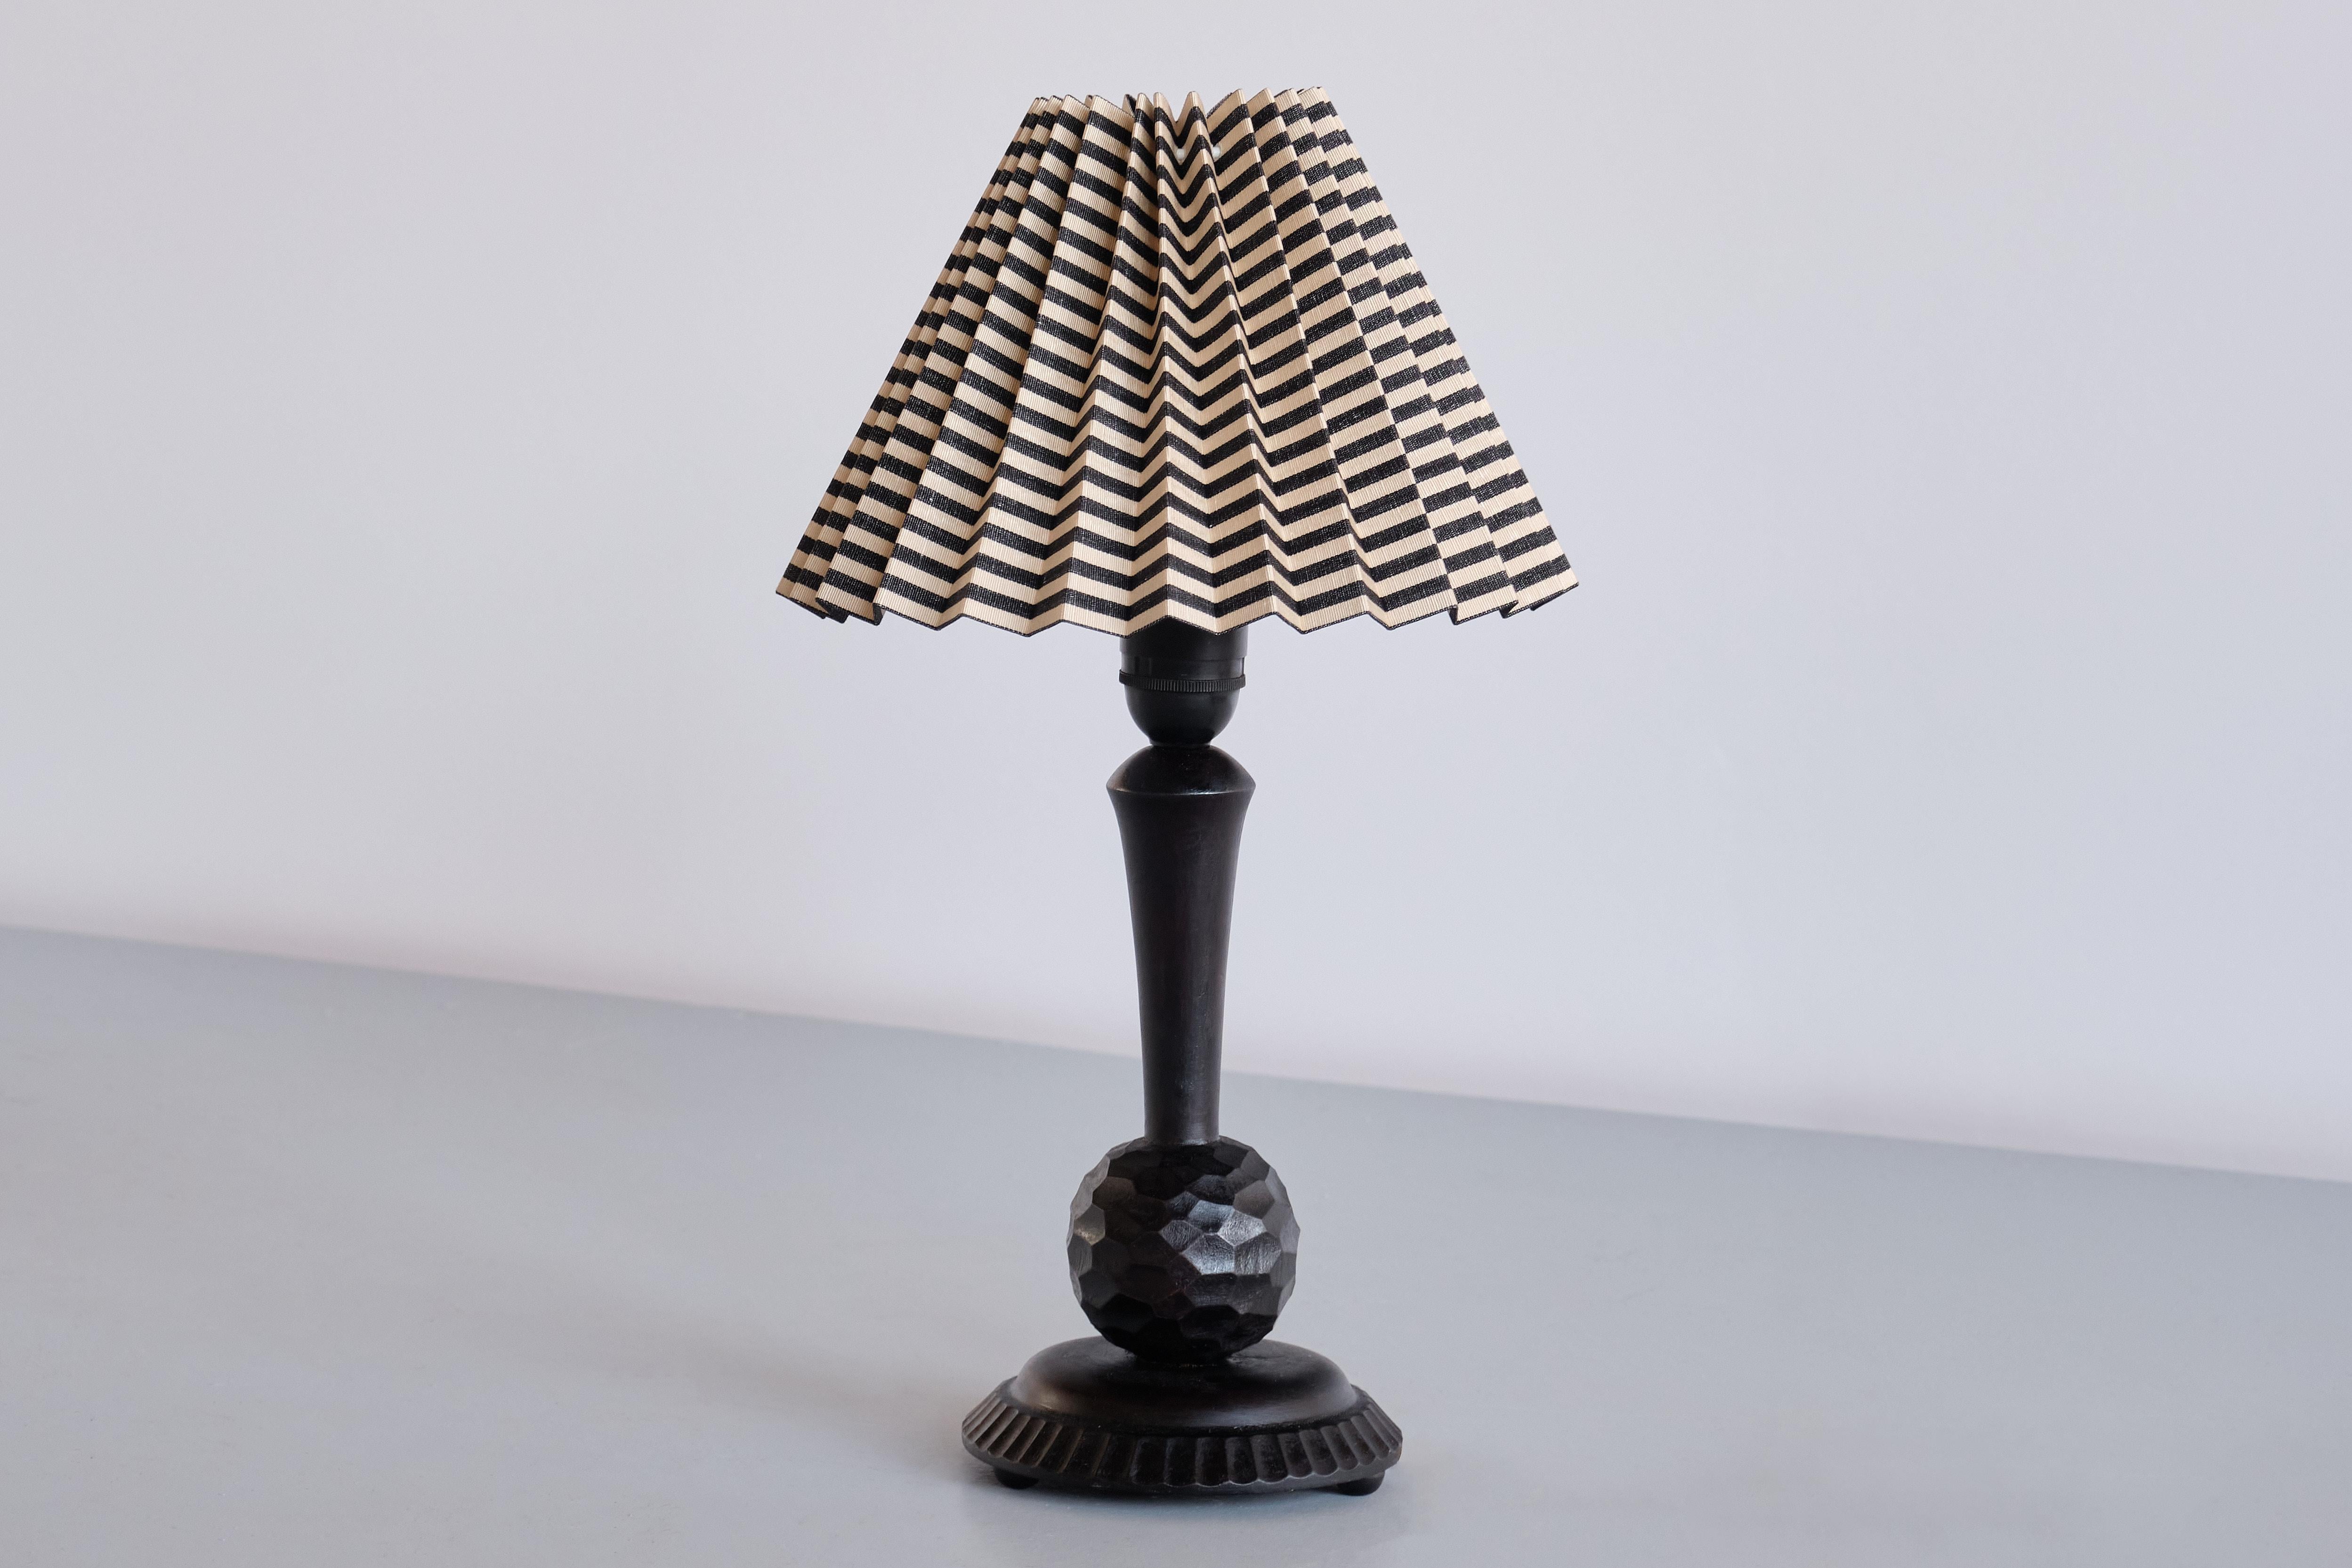 This elegant table lamp was hand made in Sweden in the early 1930s.
The design is marked by the base in black lacquered birch wood. The sphere shape with intricate, hand carved details, giving the wood a beautiful texture. The circular base with